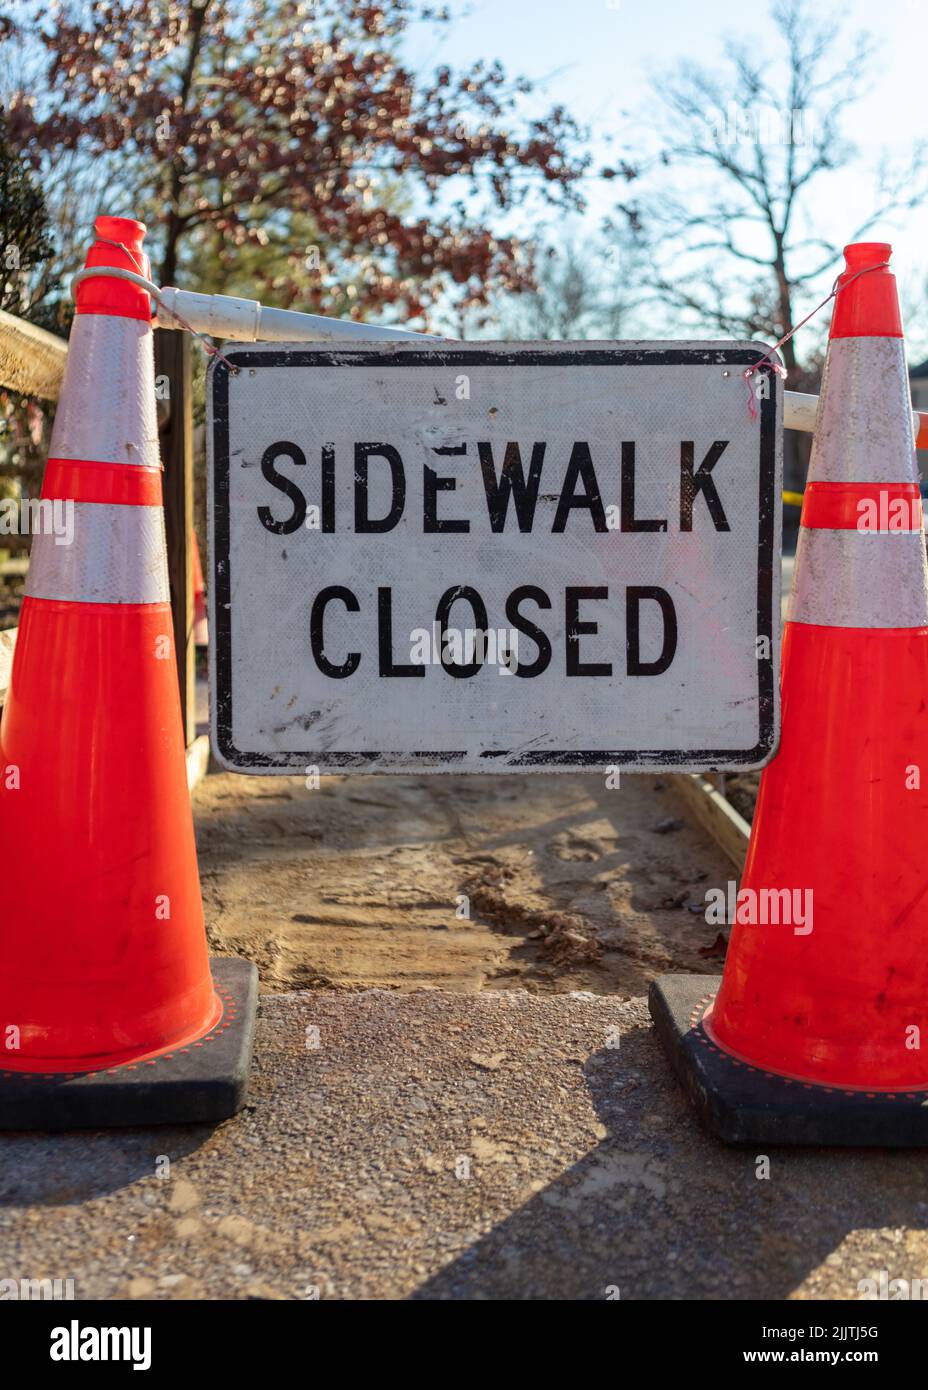 A sign with text 'Sidewalk closed' between two traffic cones in the street Stock Photo